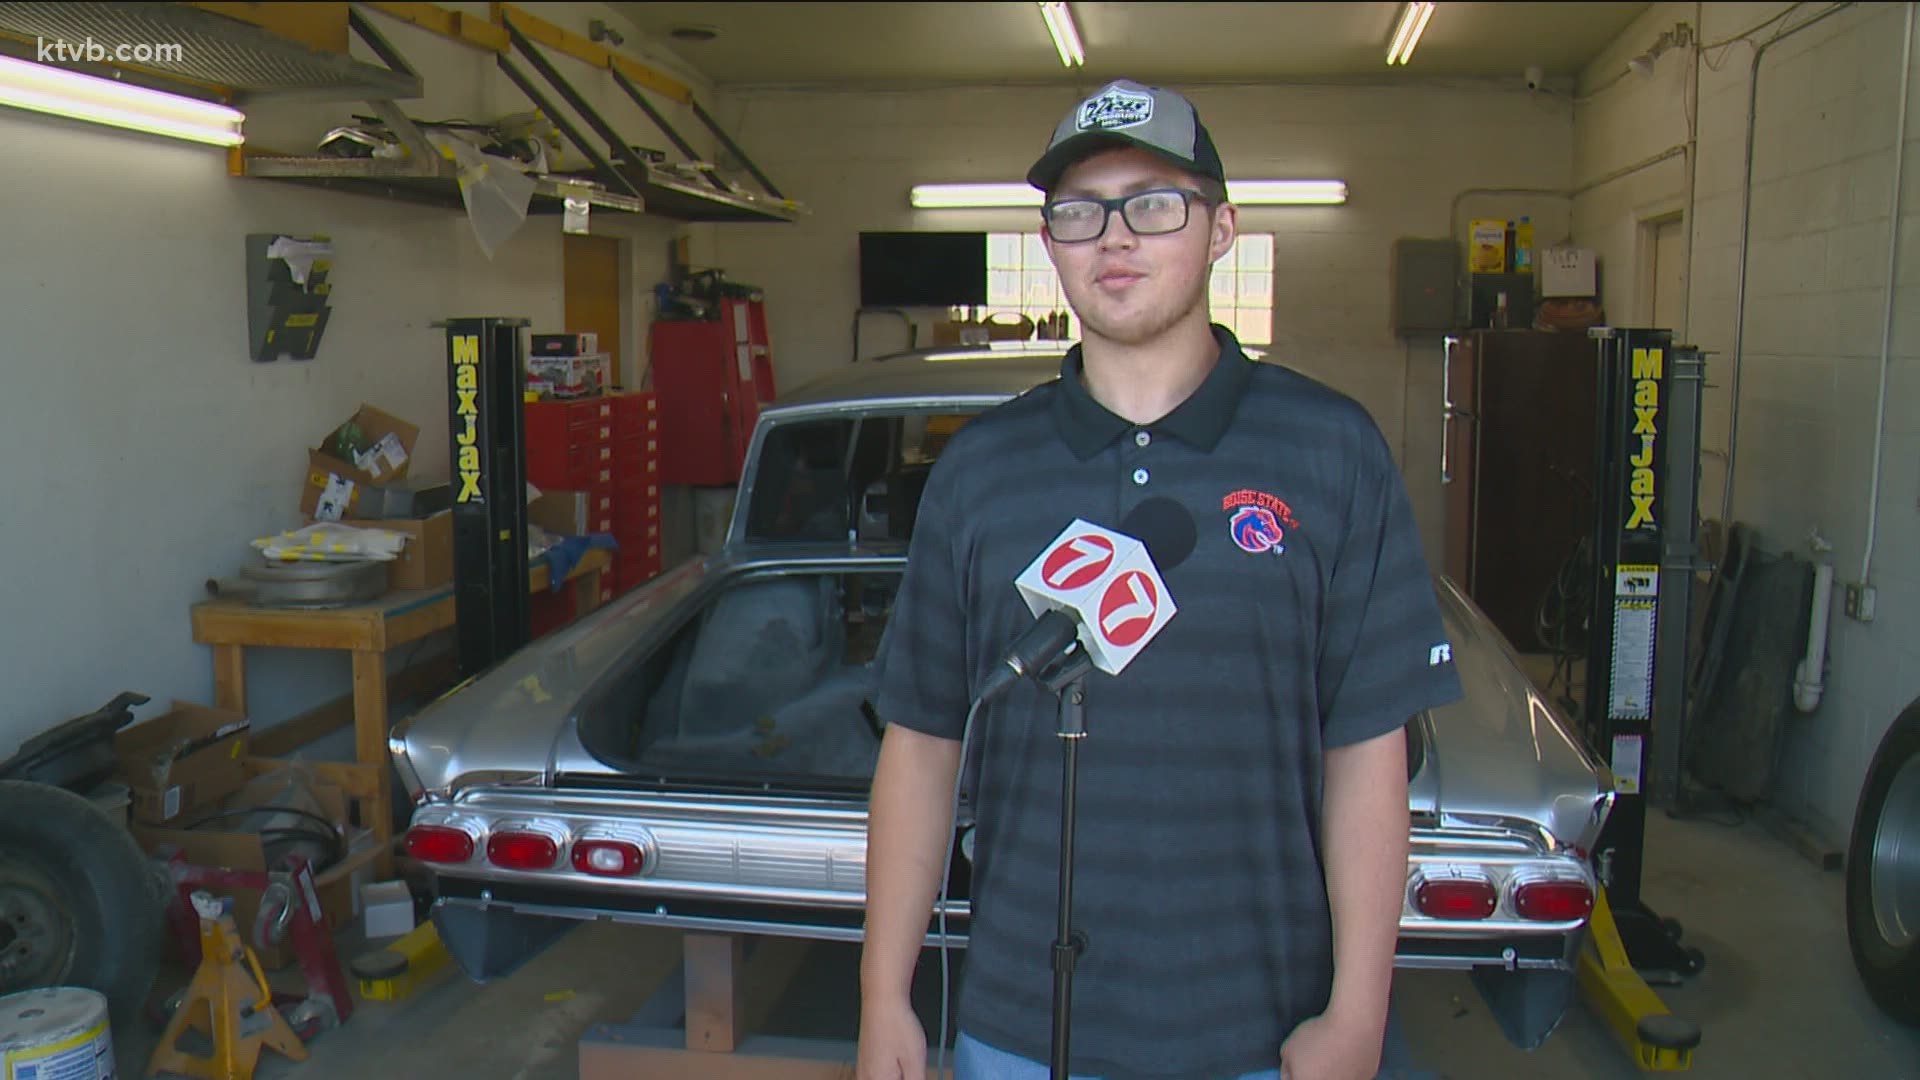 Cole Medcoff bought a 1964 Mercury Monterey with dreams of restoring it. After he was diagnosed with a brain tumor, a Boise man got local businesses to help.